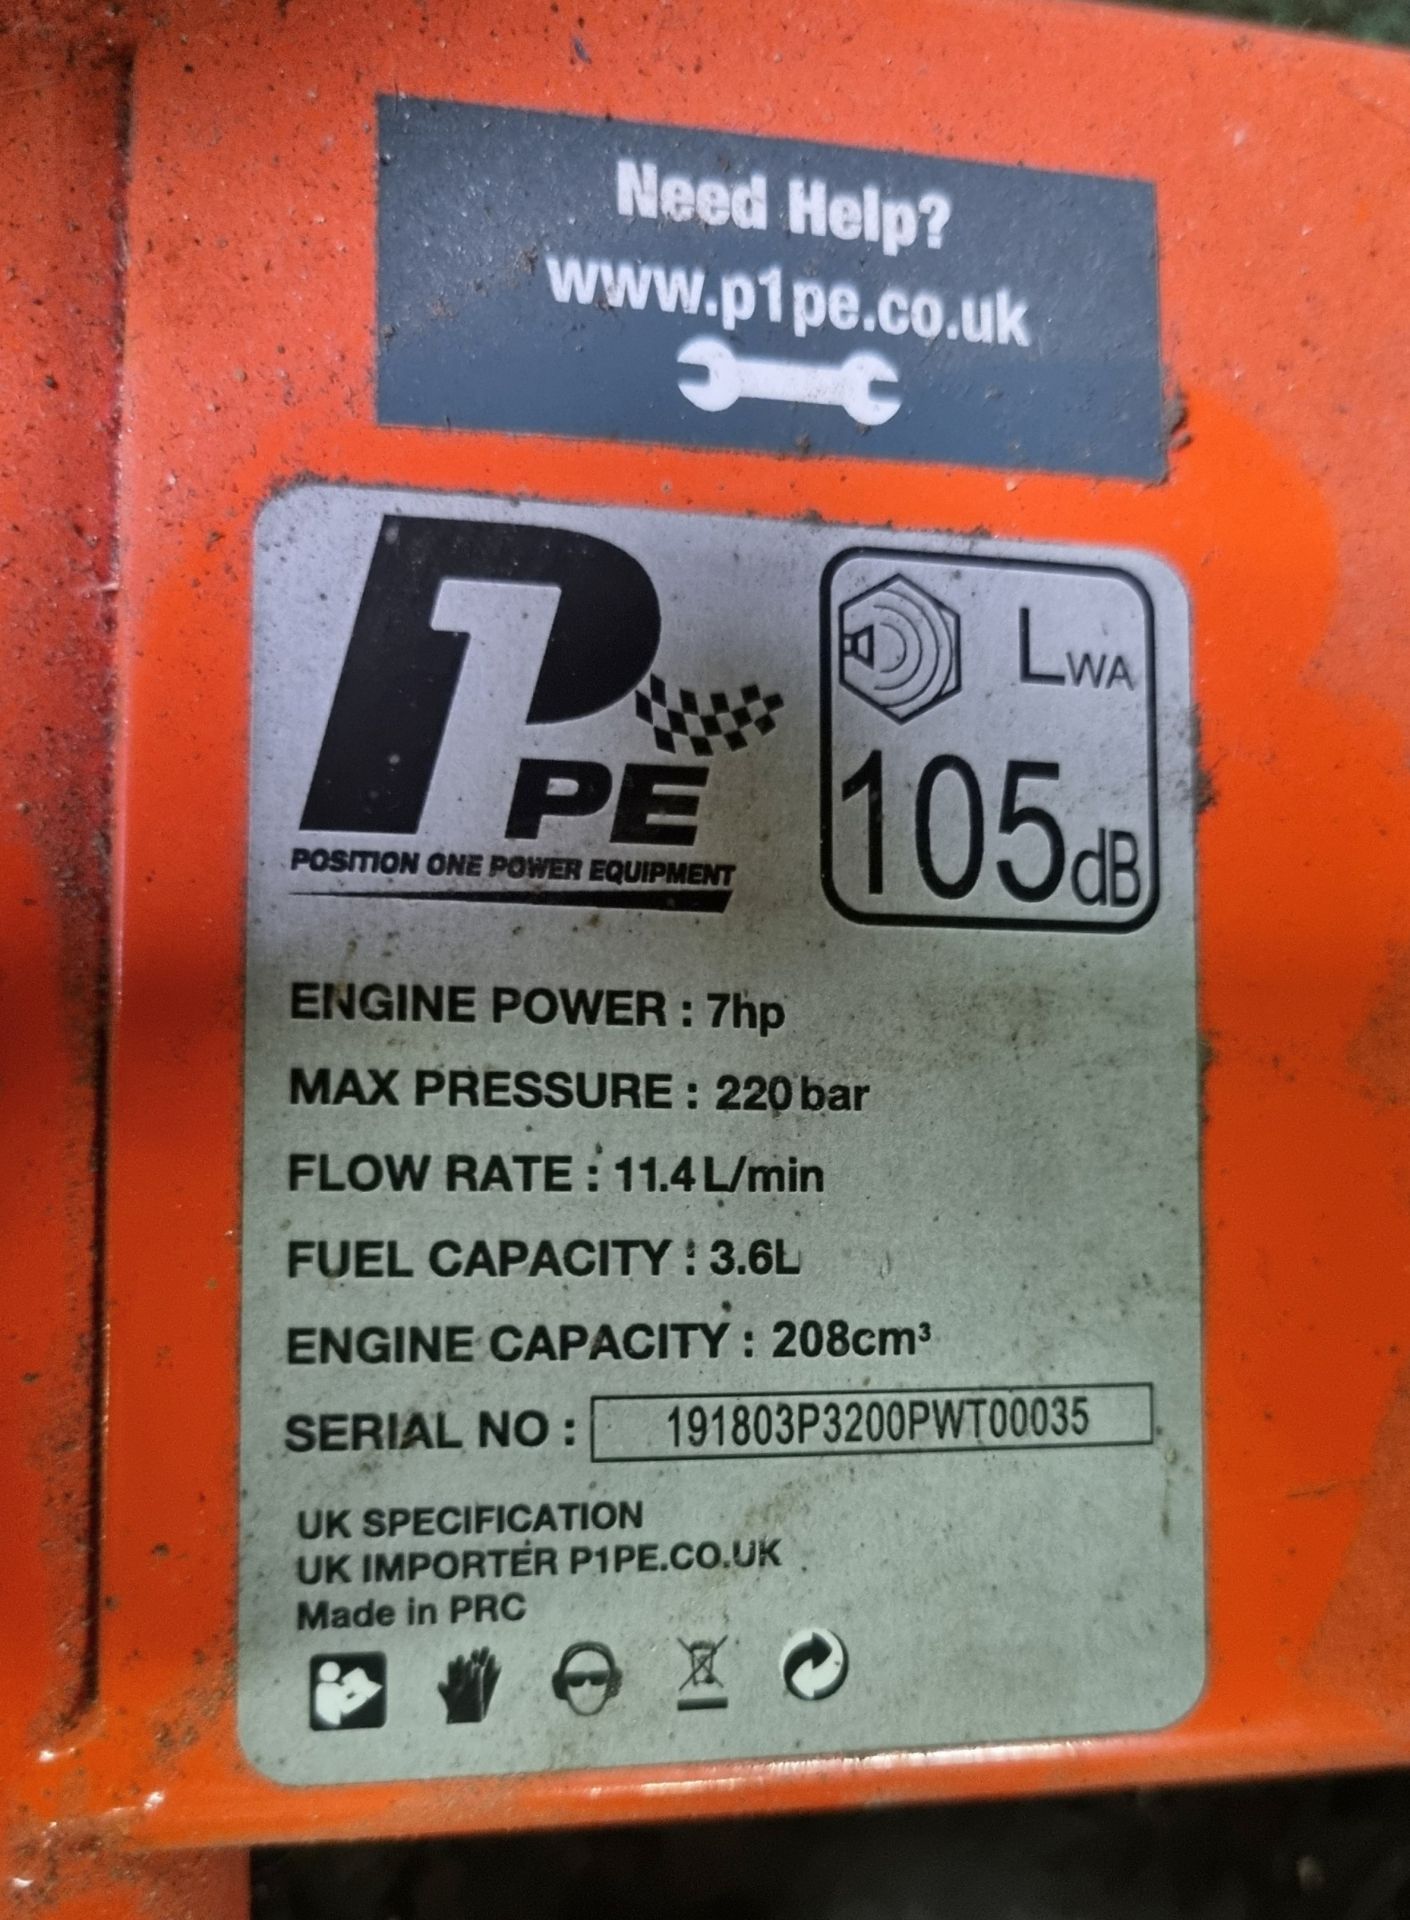 Position One Power Equipment commercial petrol pressure washer with Hyundai engine - details in desc - Image 8 of 8